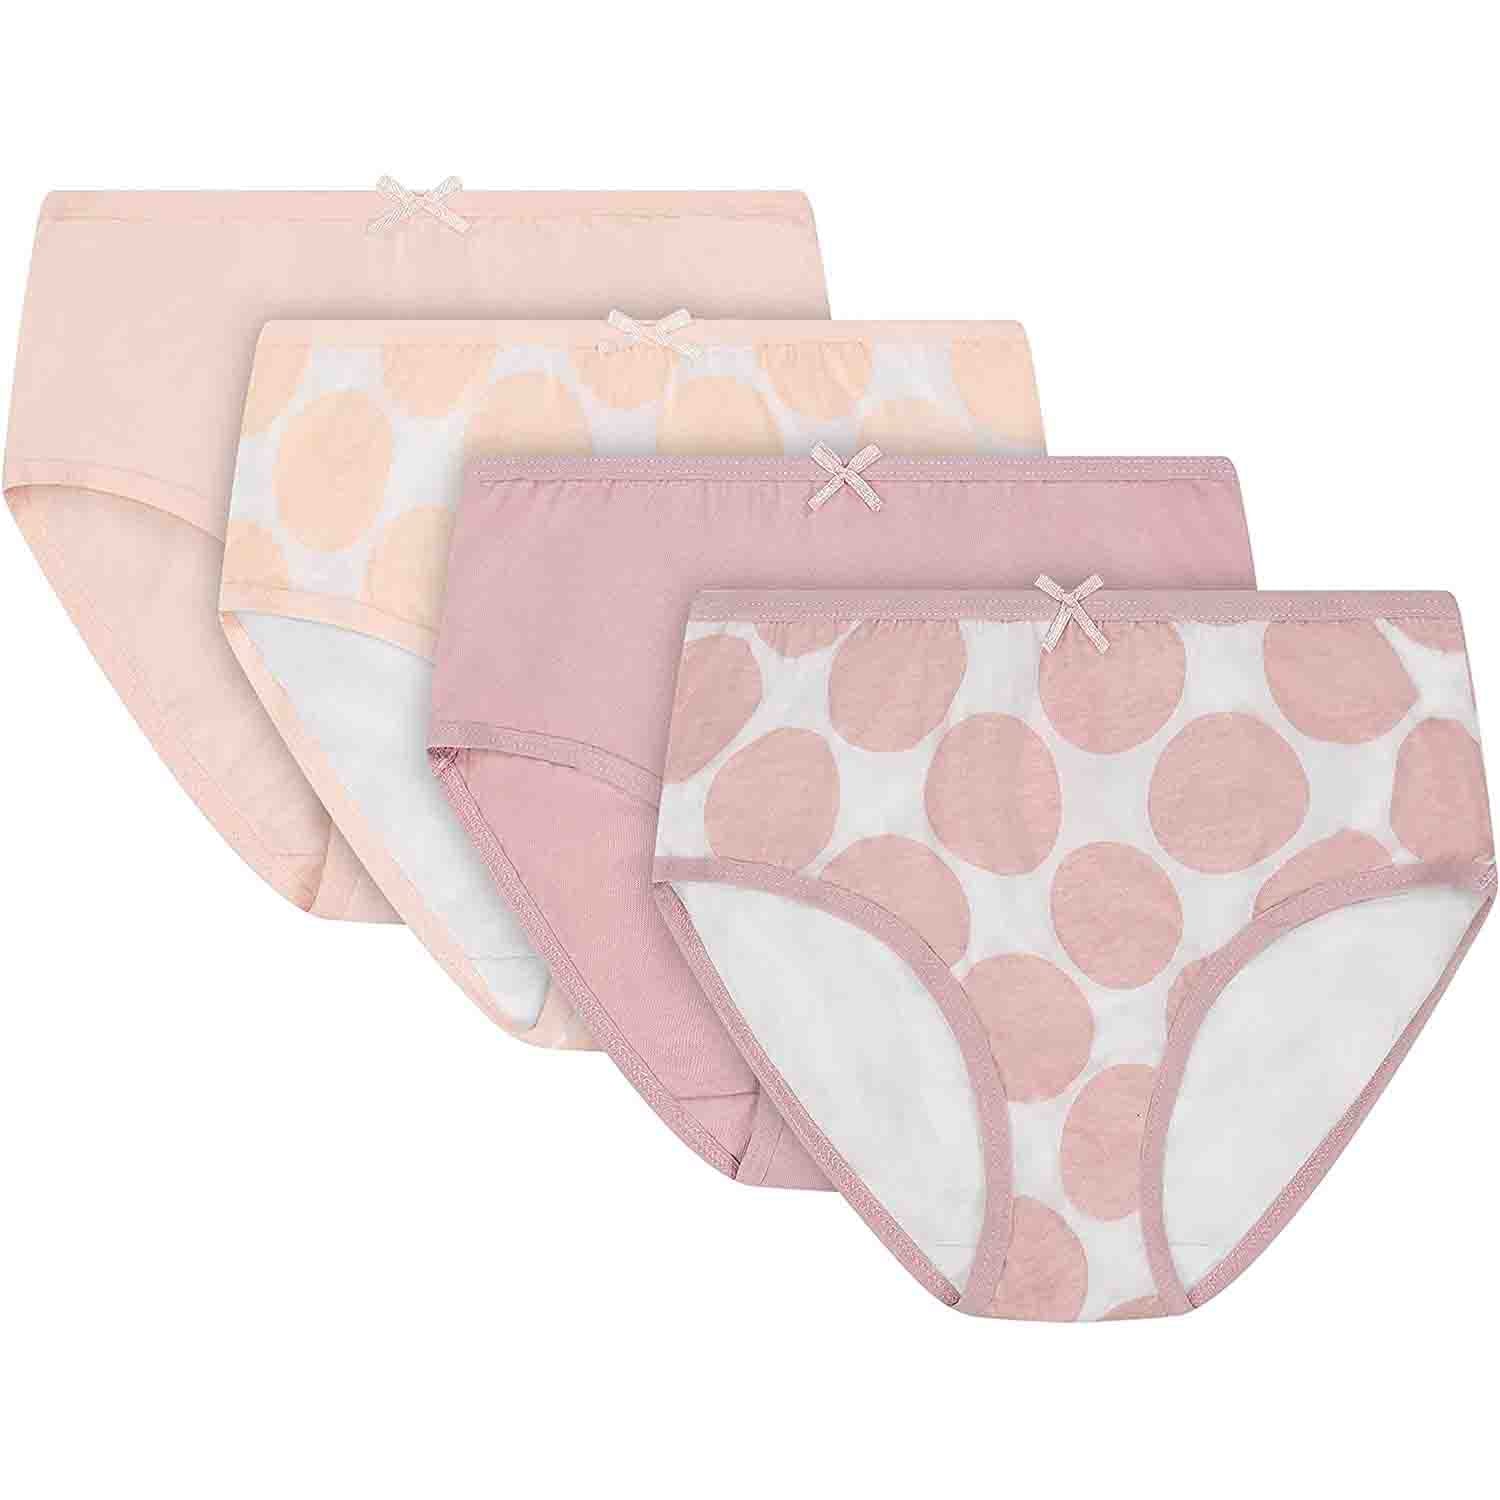 Slenders 4 Pack Cotton Midi Brief BF84 Pink Small, Pink, Small